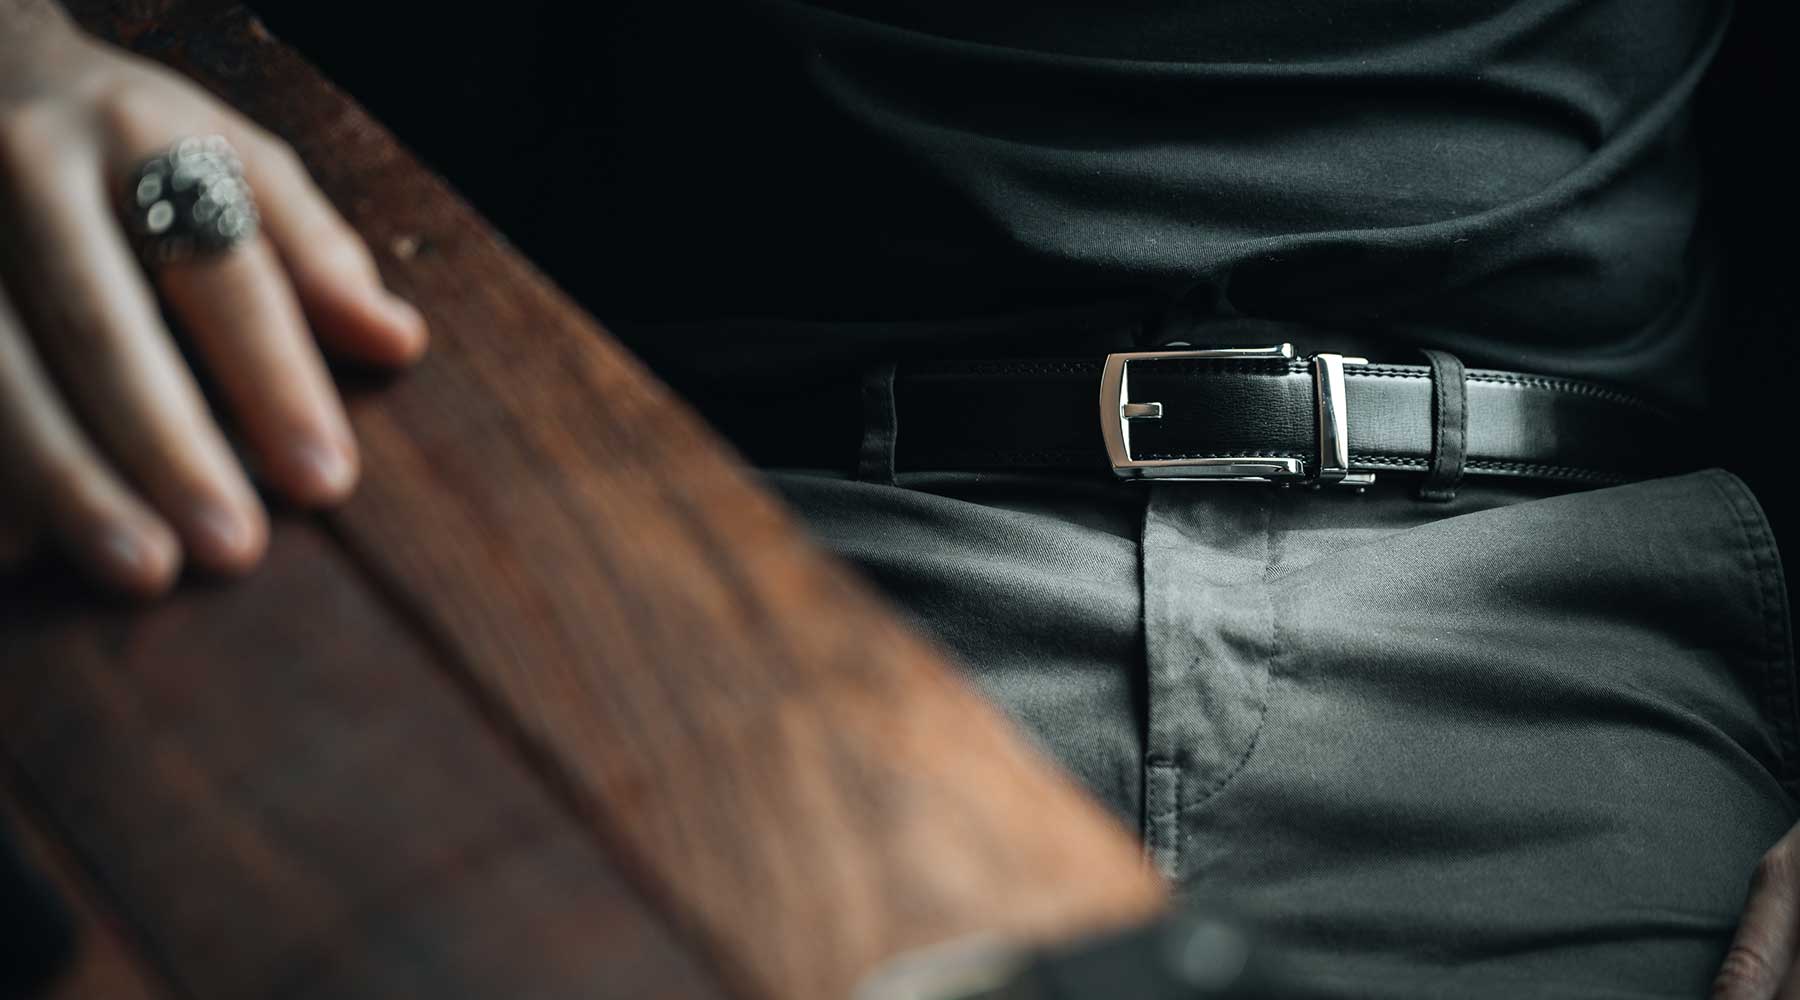 The belt buckle: A Guide to Wearing Belts with Style插图2